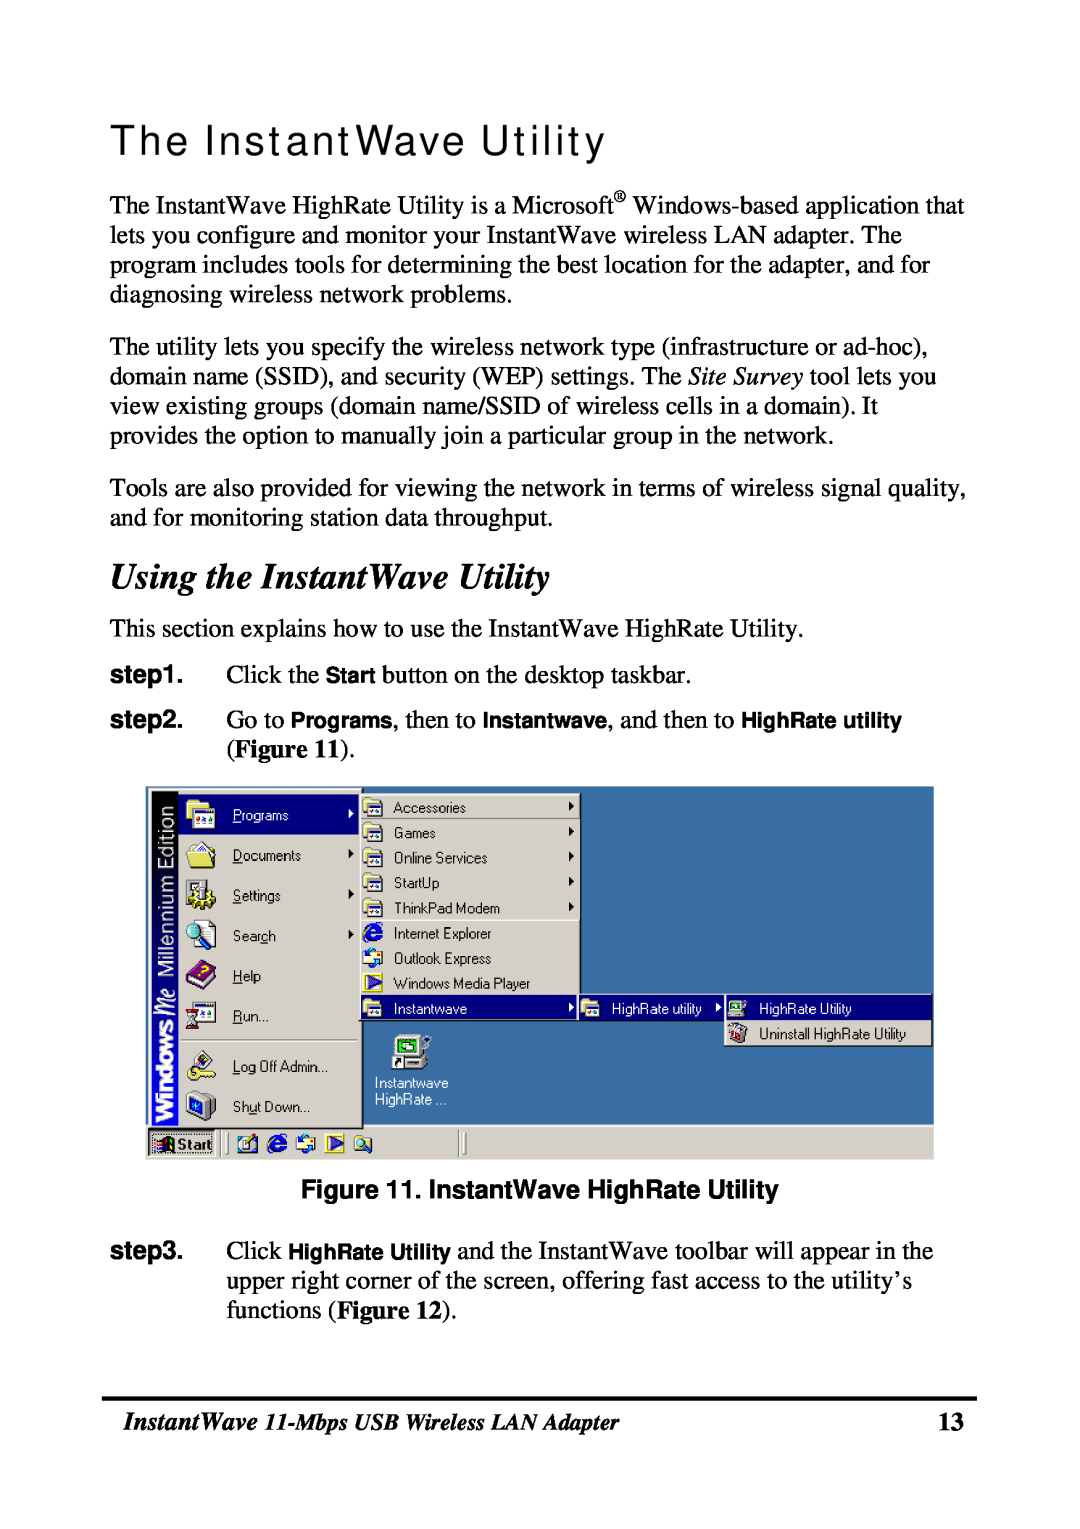 NDC comm NWH4020 manual The InstantWave Utility, Using the InstantWave Utility, InstantWave HighRate Utility 